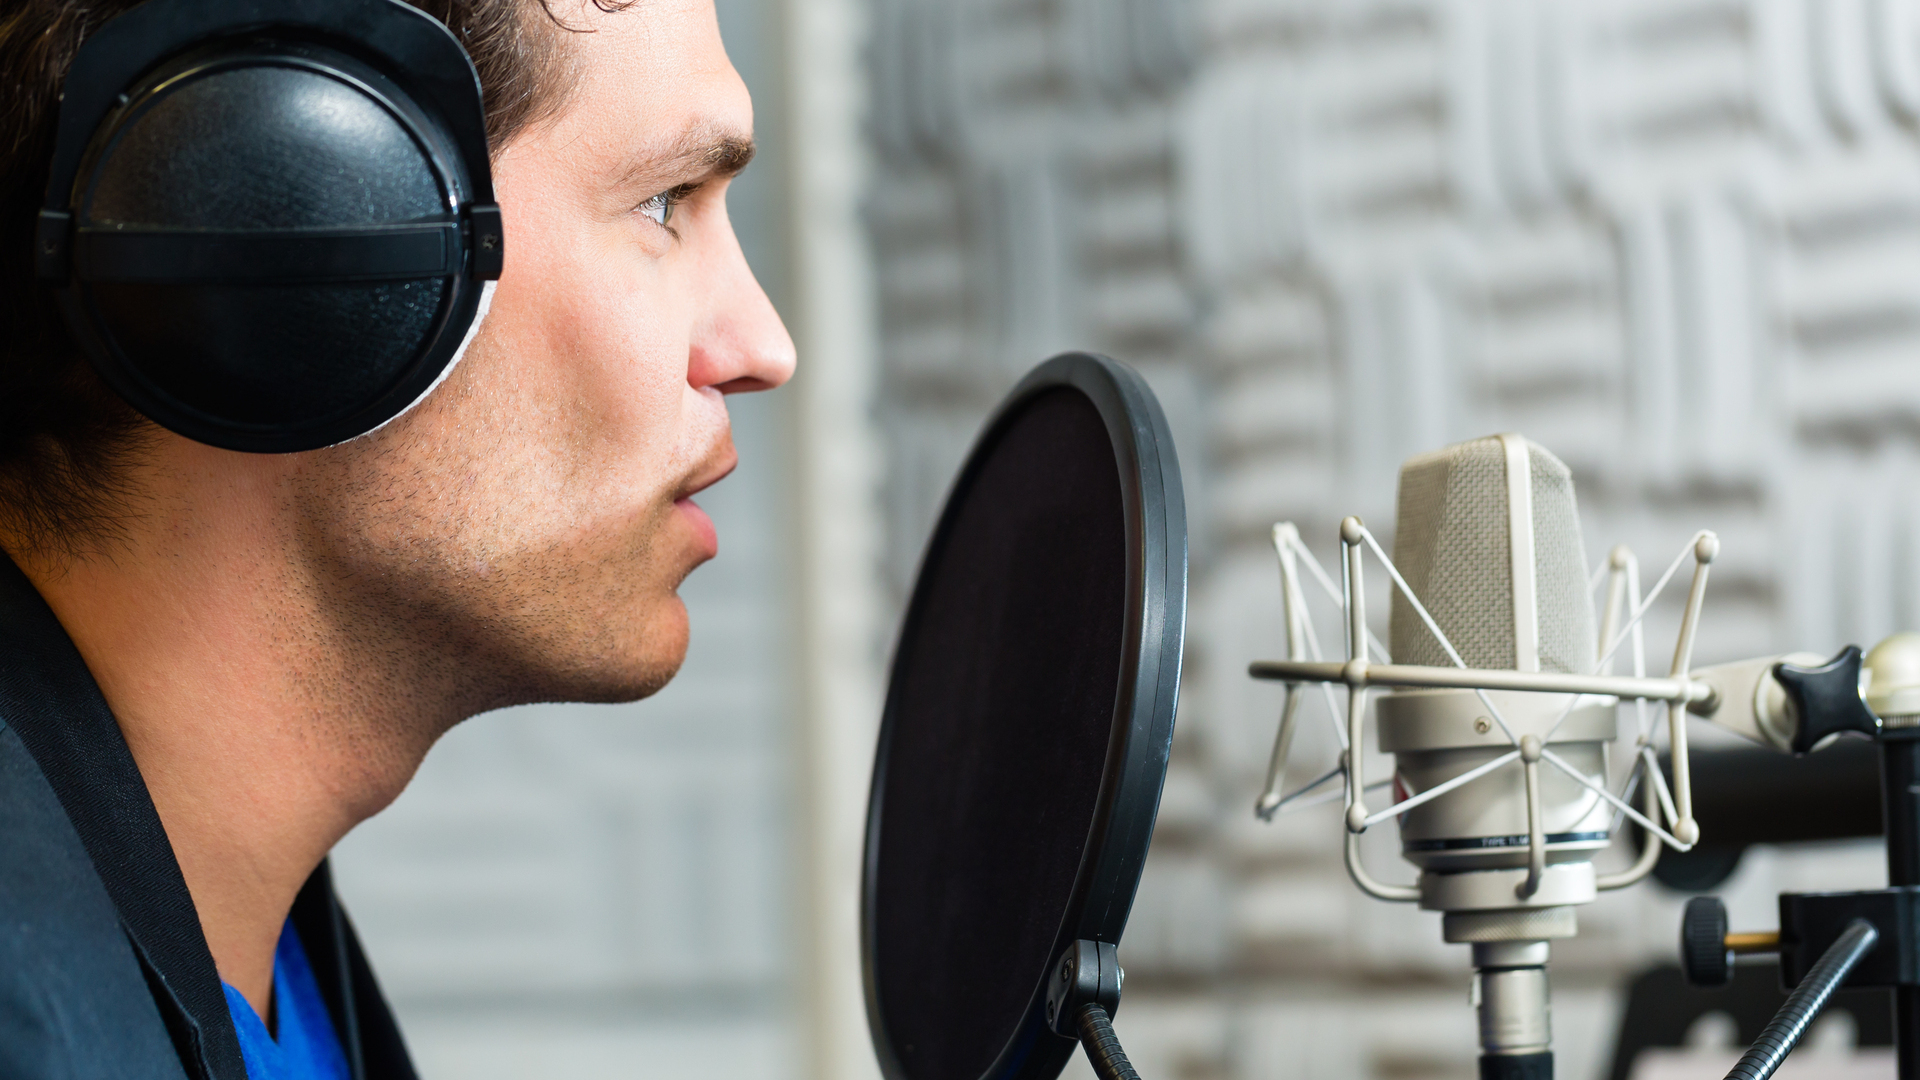 Frequently Asked Questions About Voice-Over